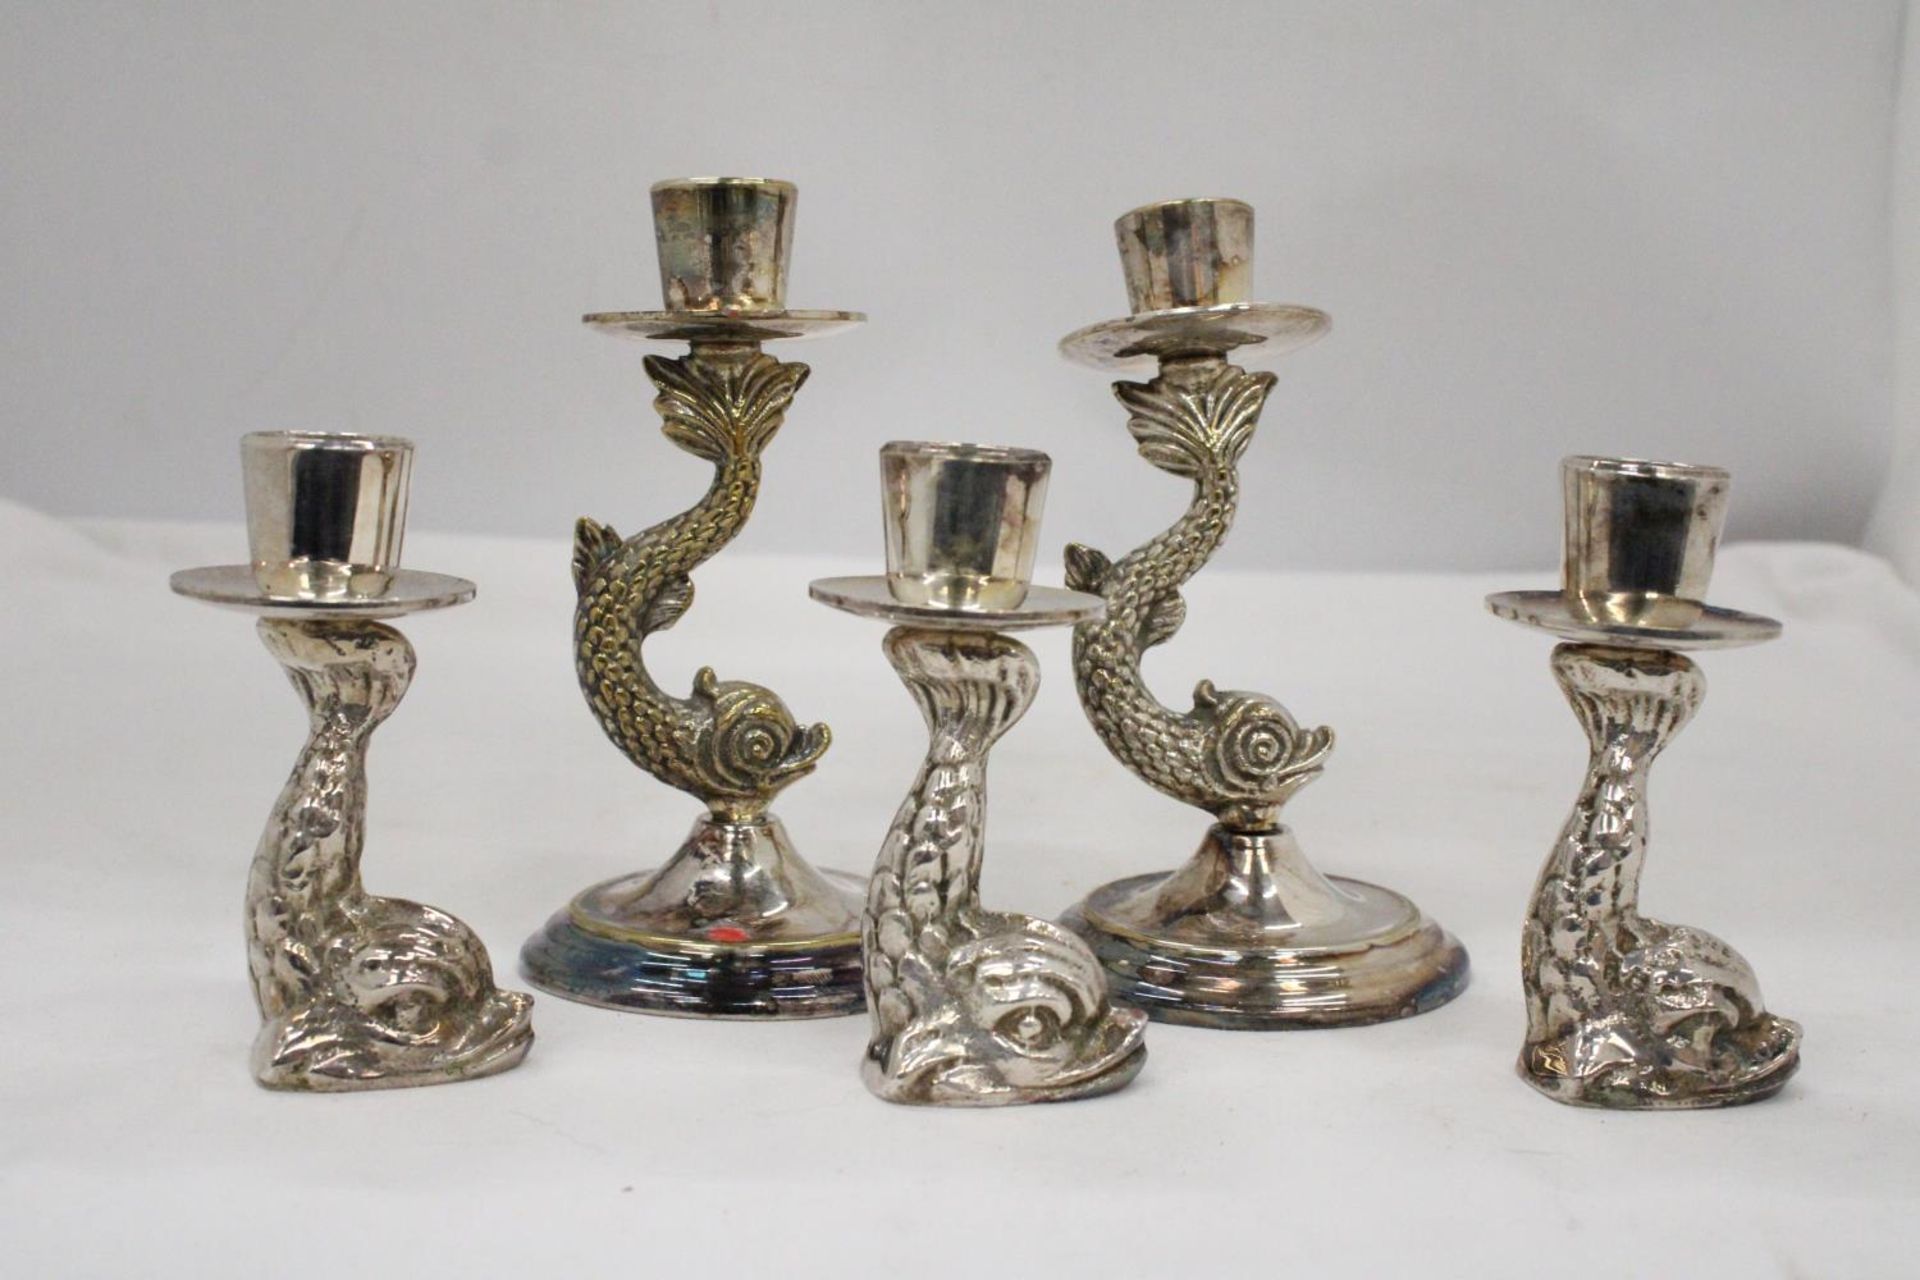 TWO VINTAGE ORNATE SILVER PLATED KOI CARP CANDLE HOLDERS PLUS THREE FURTHER KOI FISH CANDLE STICKS